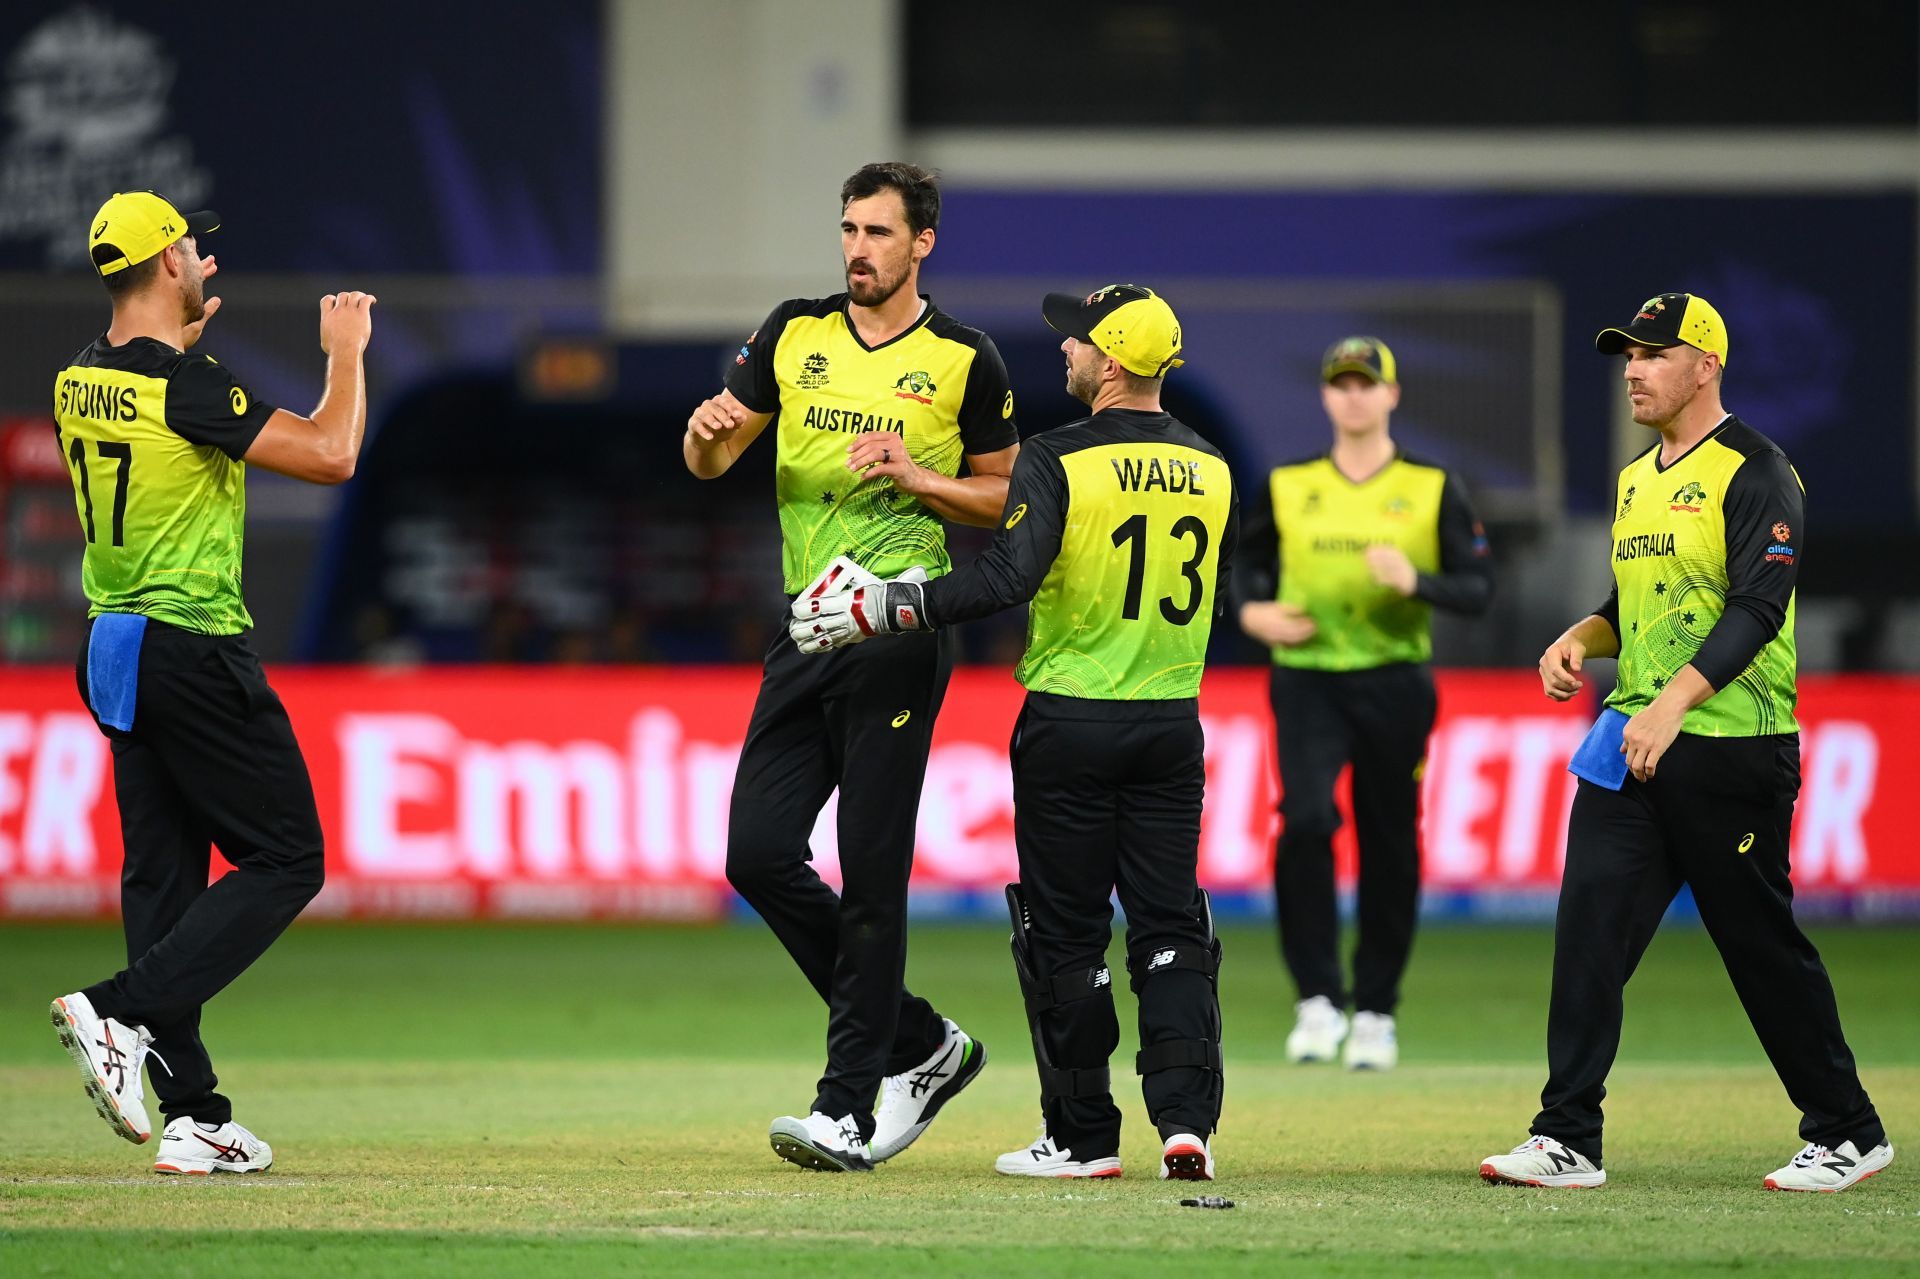 Australian cricket team during the match against Sri Lanka. Pic: Getty Images